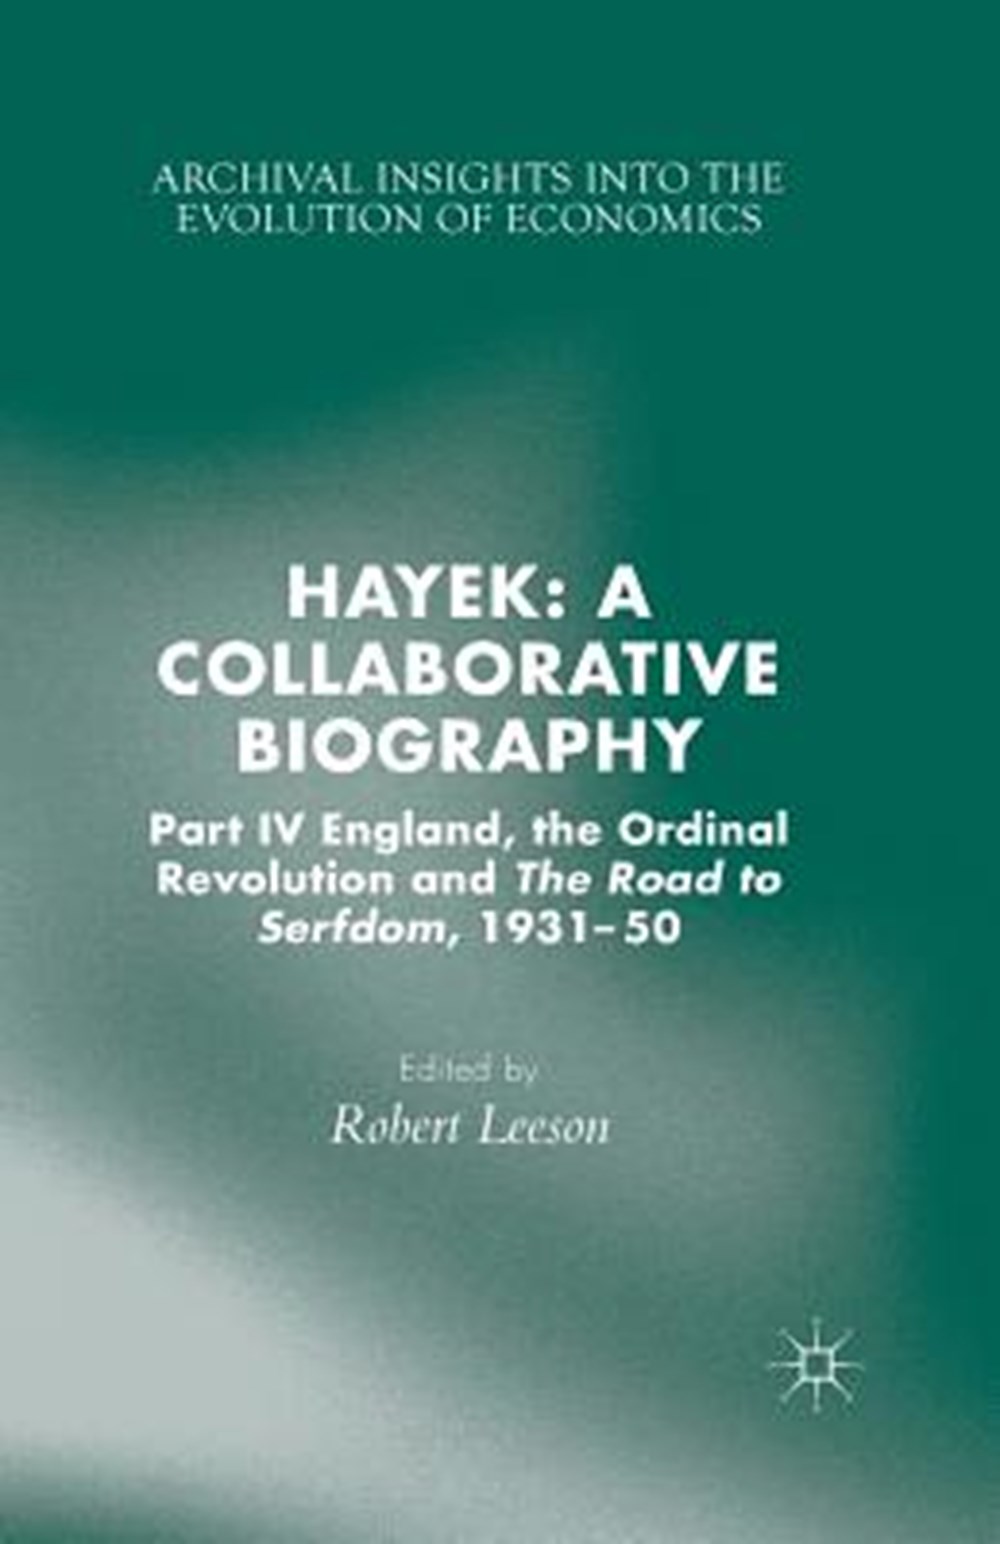 Hayek A Collaborative Biography: Part IV, England, the Ordinal Revolution and the Road to Serfdom, 1